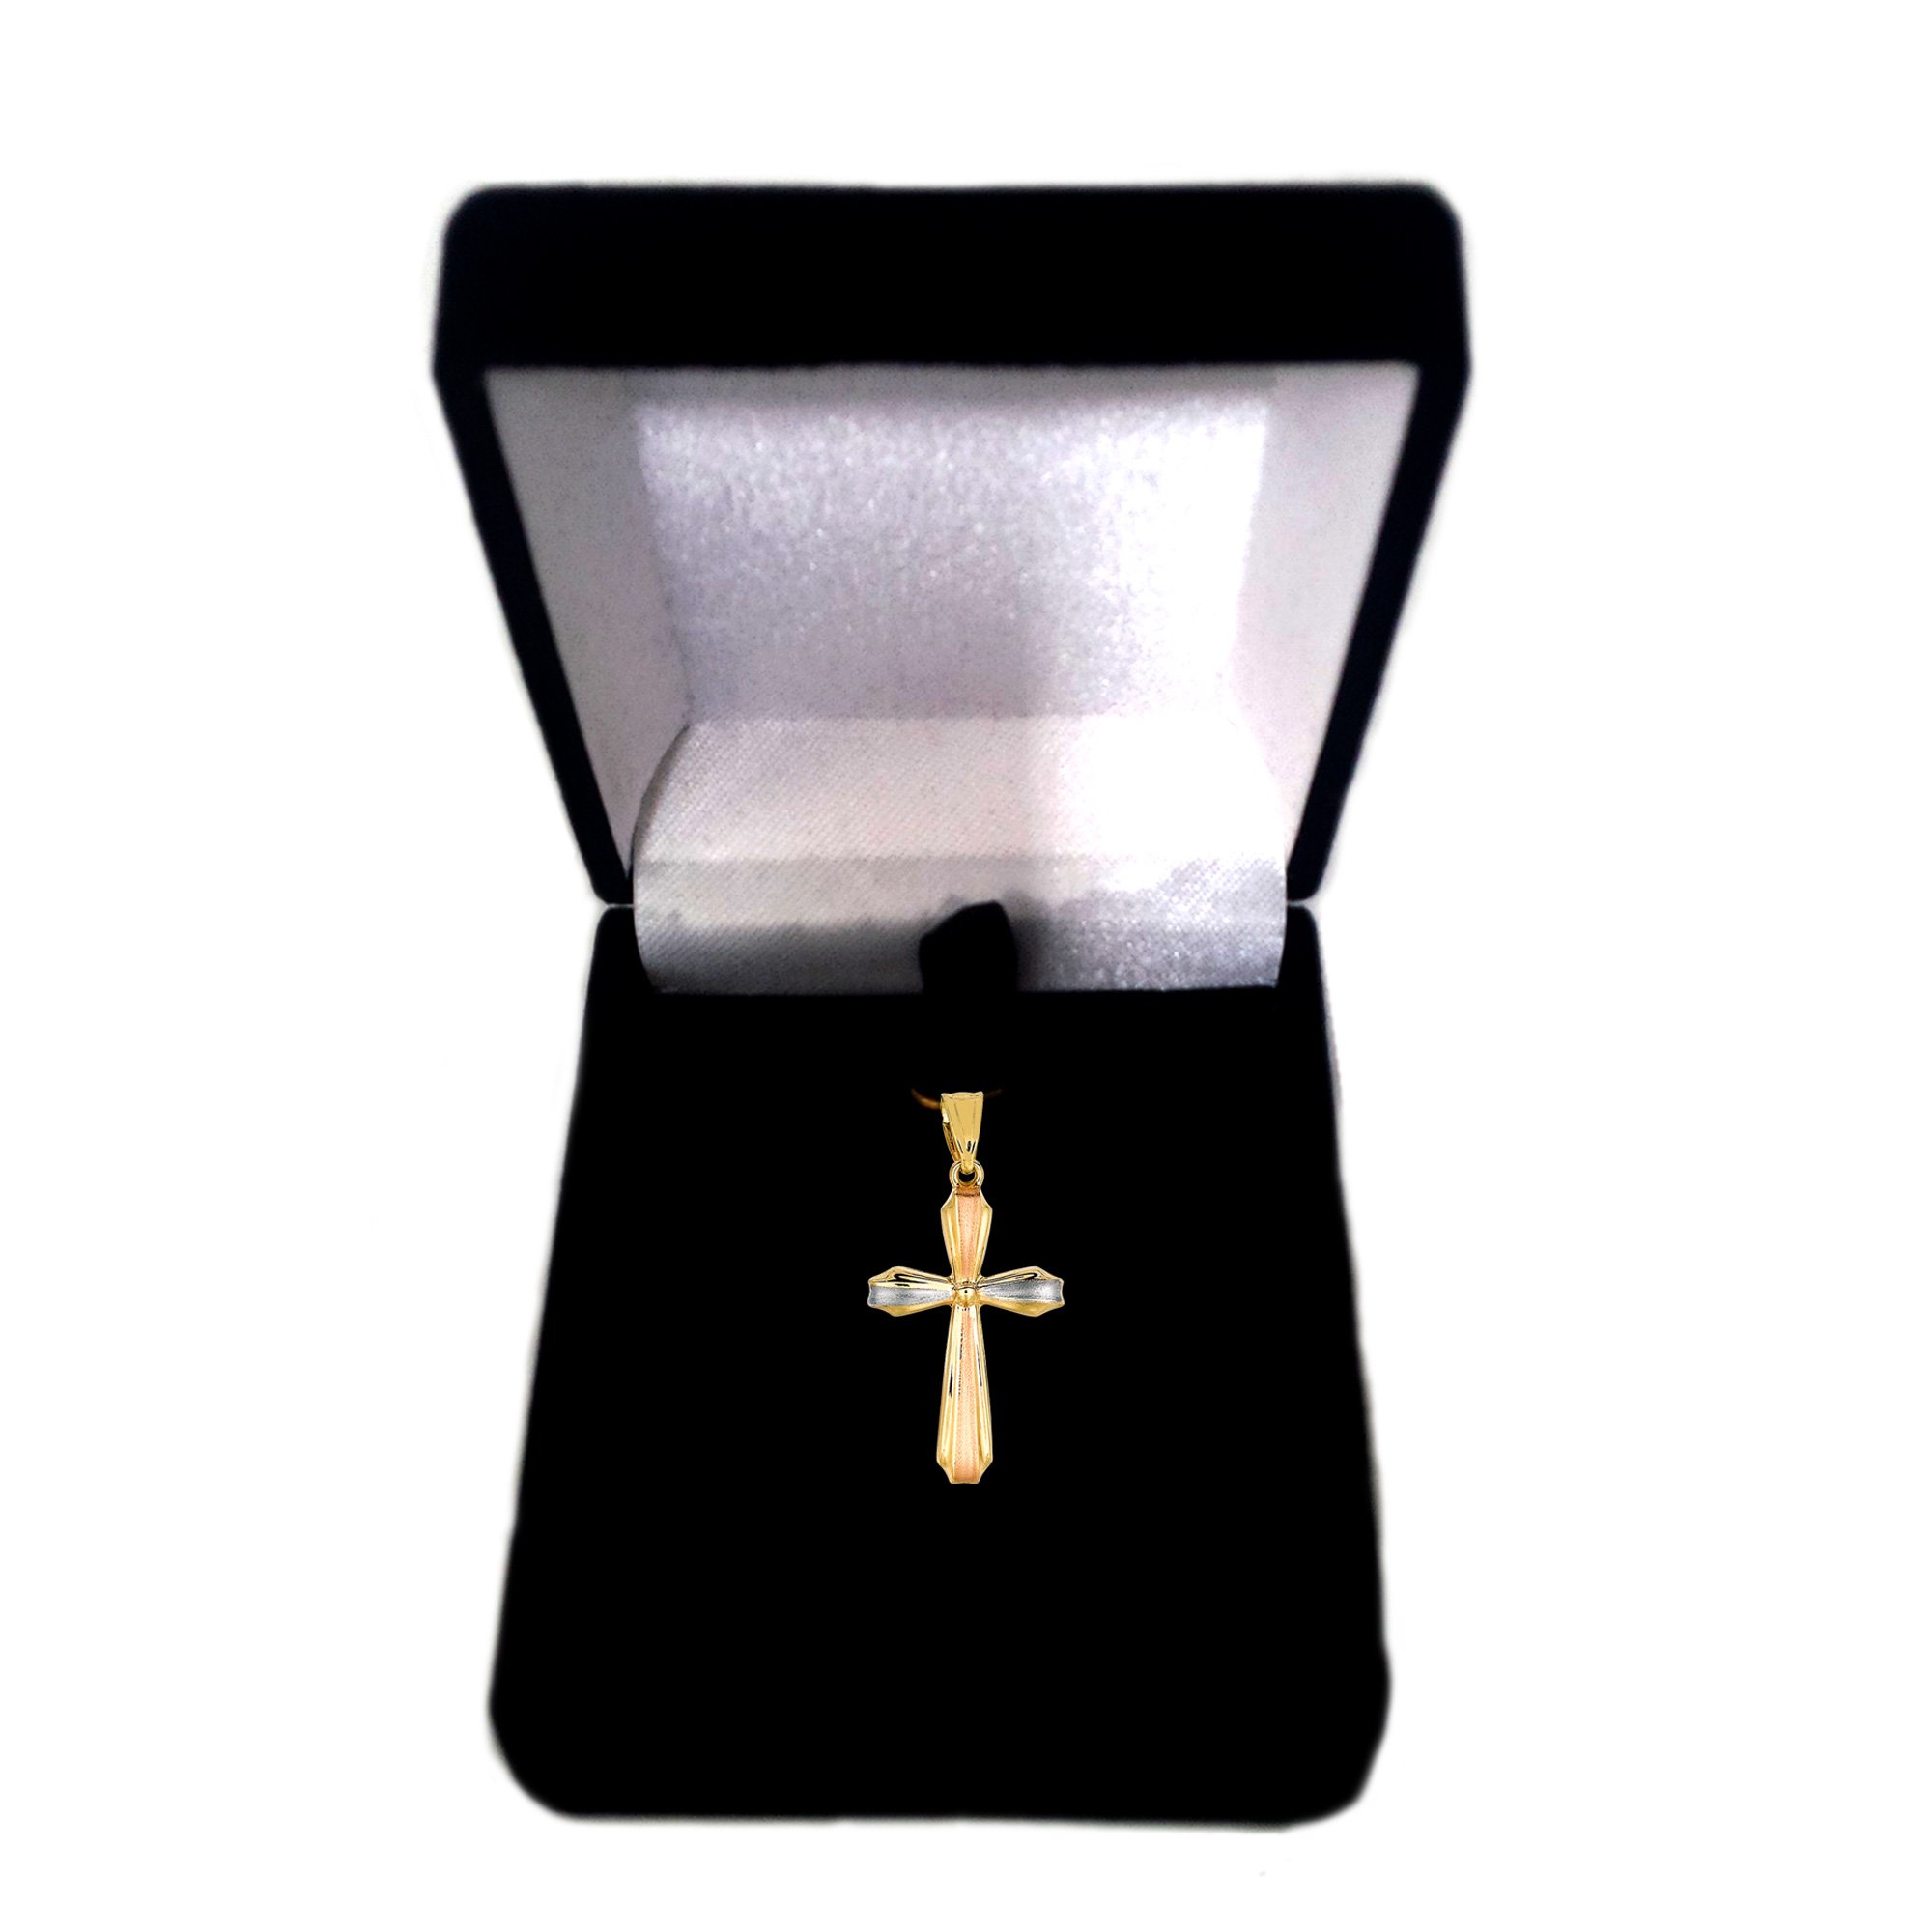 Jewelry Affairs 14k Tricolor Gold Satin And High Polish Finish Cross Pendant